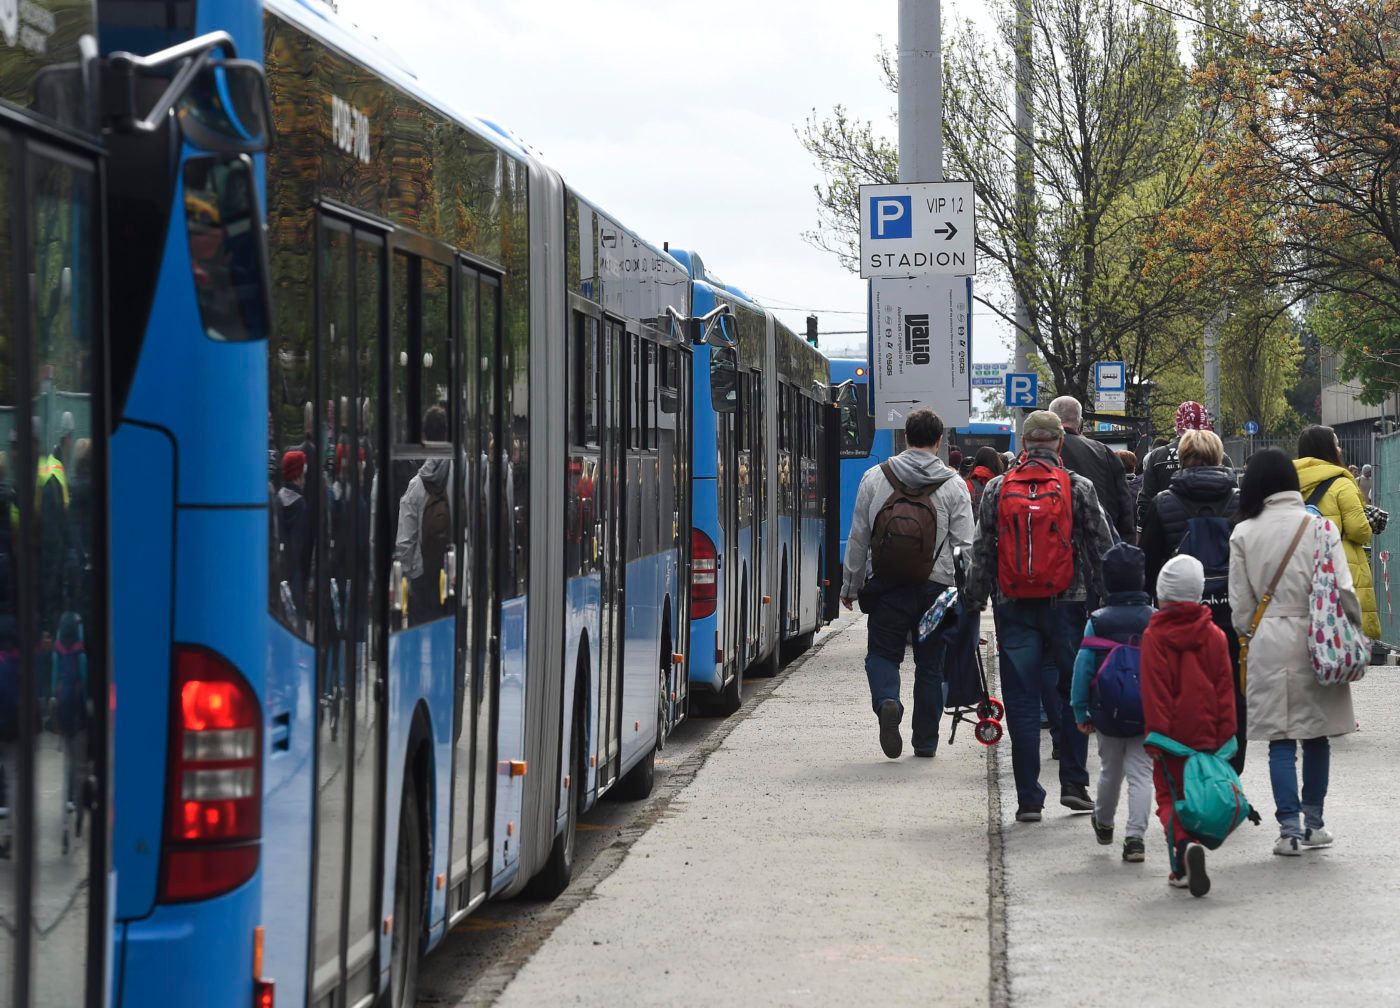 Budapest Public Transport May Shut Down Due to Lack of Gov’t Funding